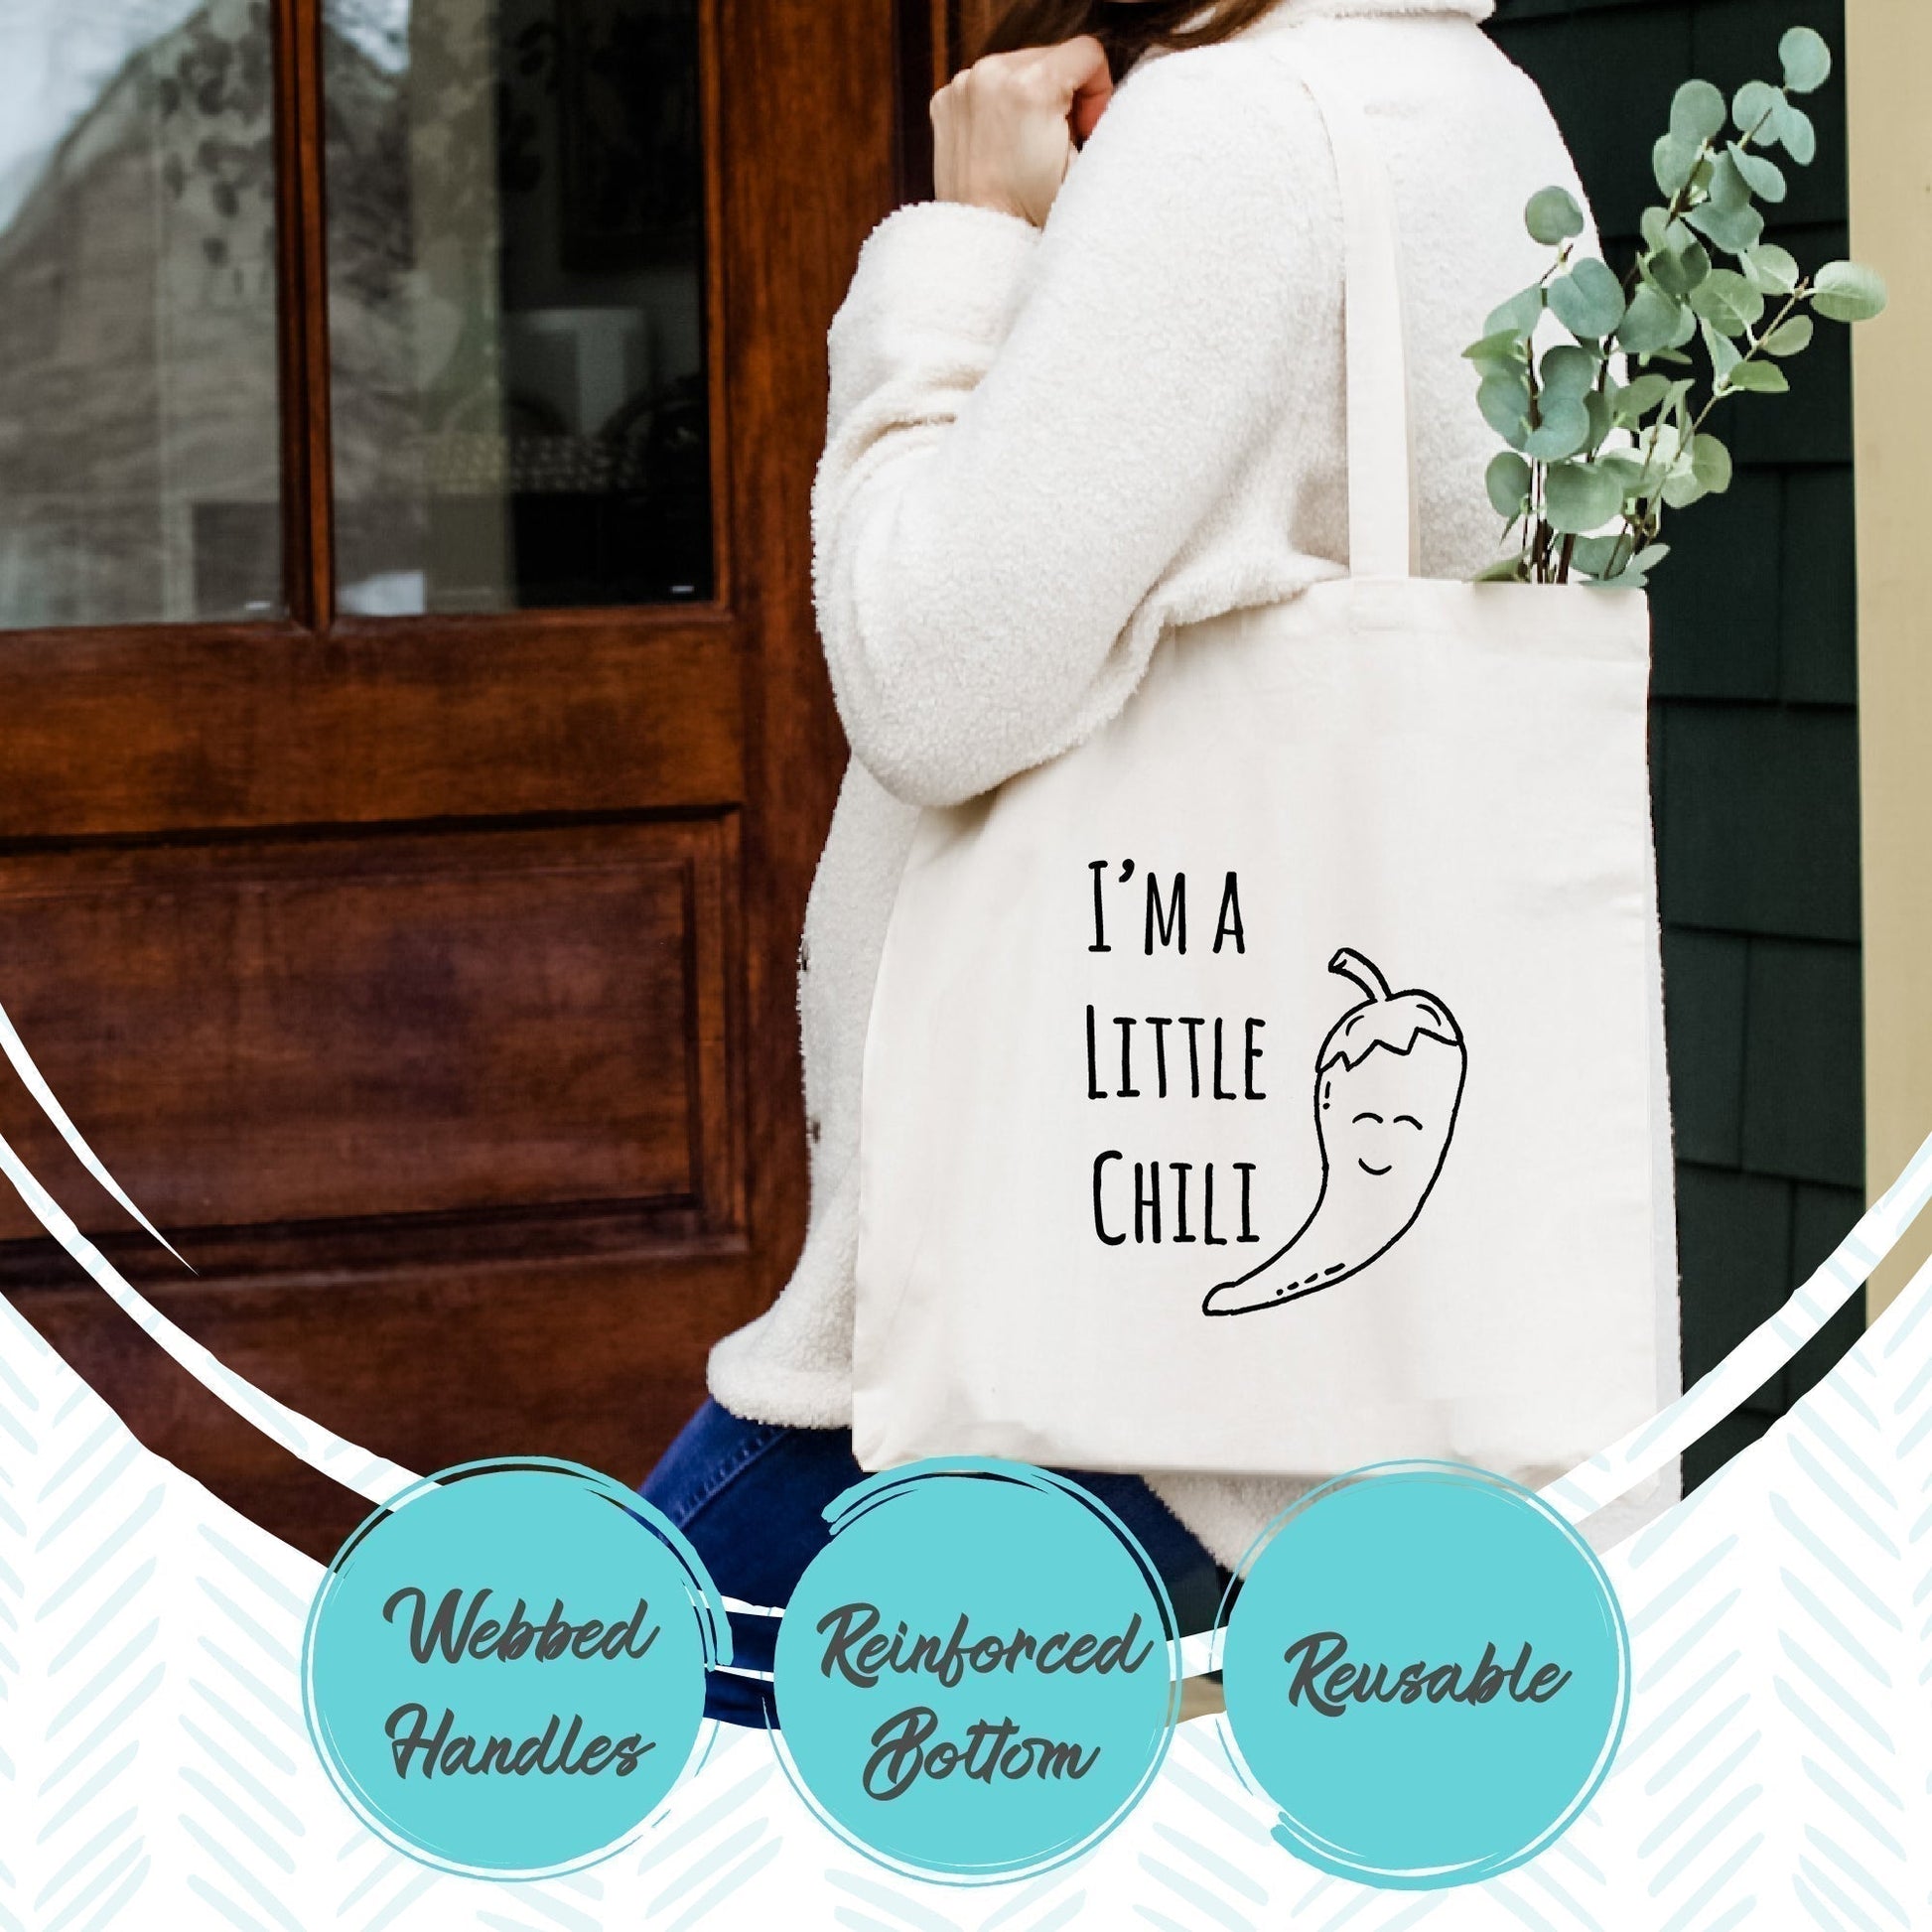 Keep Calm and Carrot On - Tote Bag - MoonlightMakers